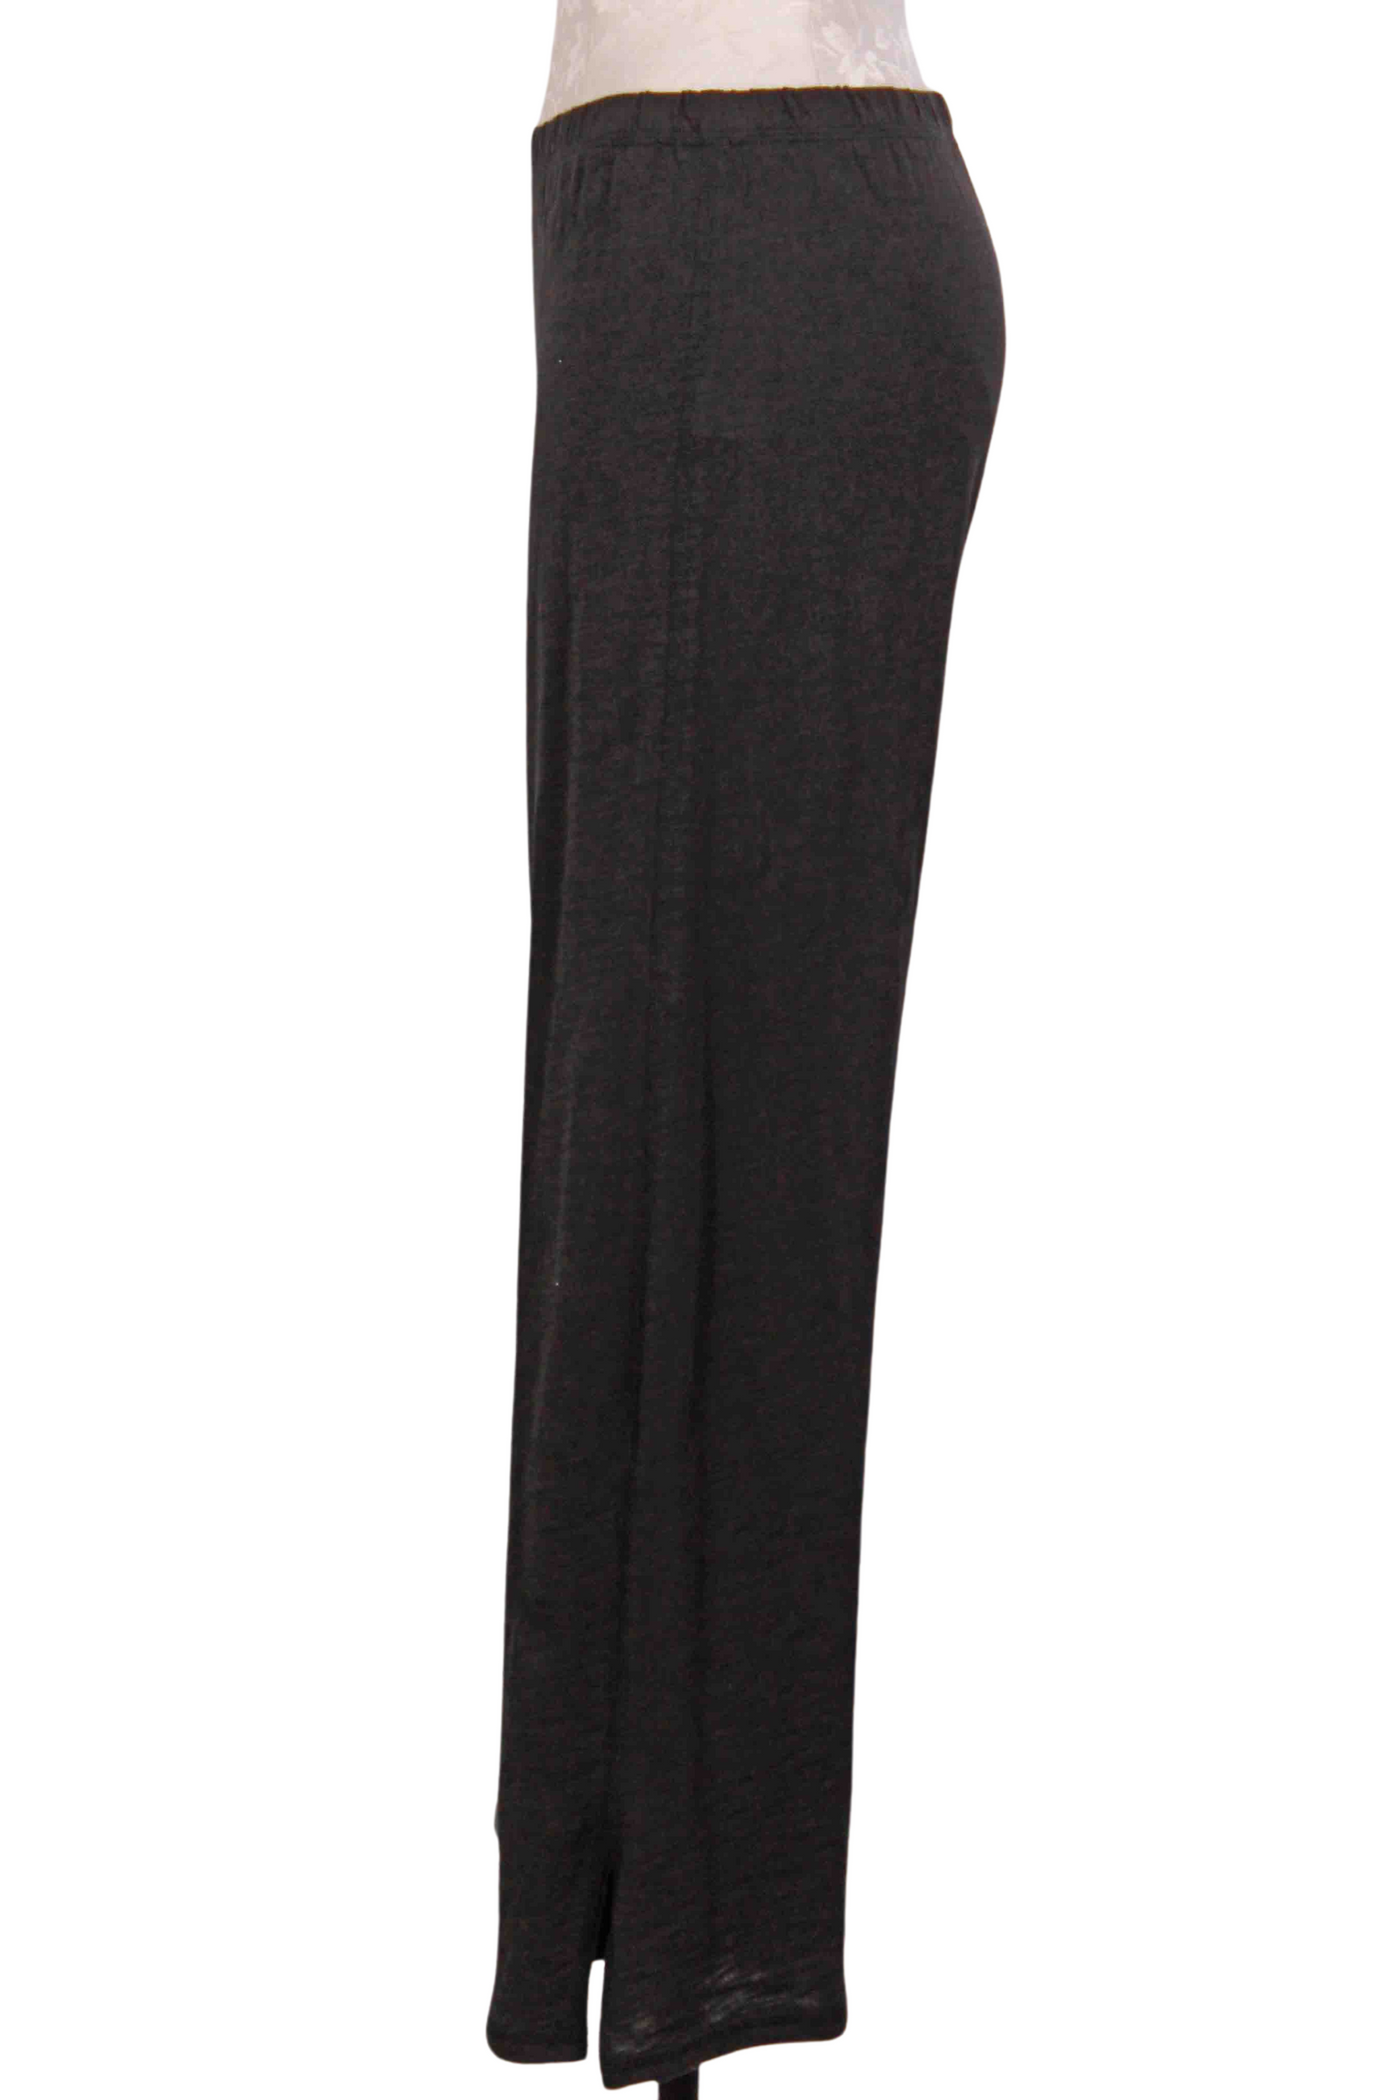 side view of Black colored The Everywhere Crop Pant by Habitat